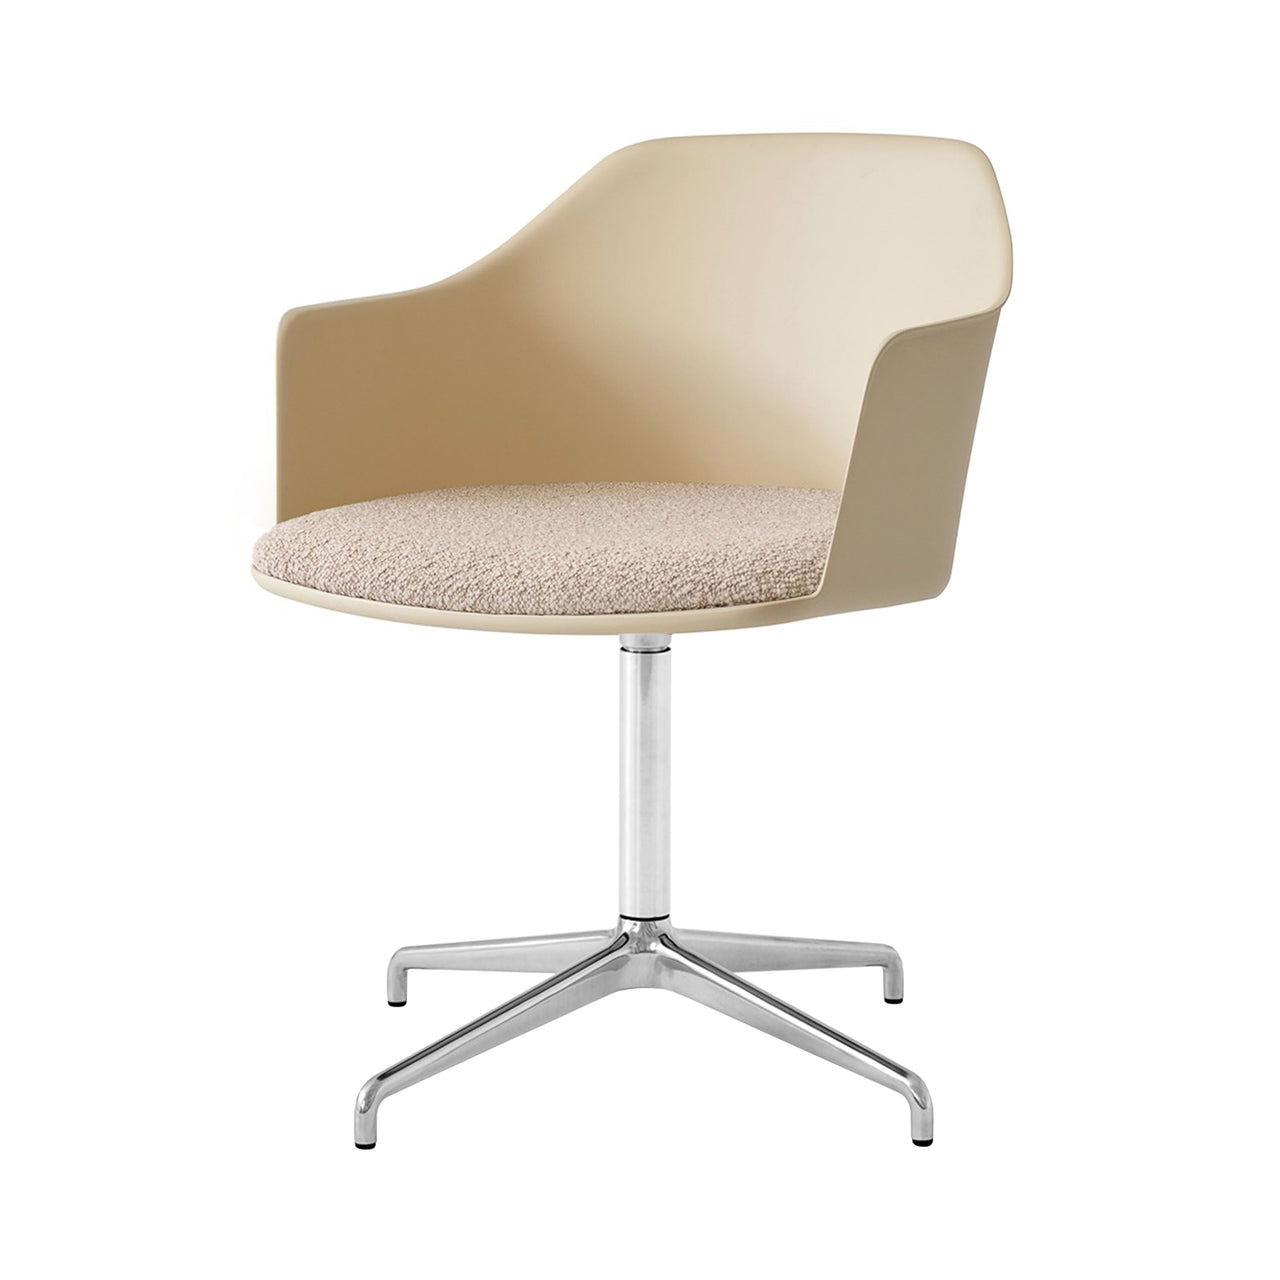 Rely Chair HW39: Polished Aluminum + Beige Sand